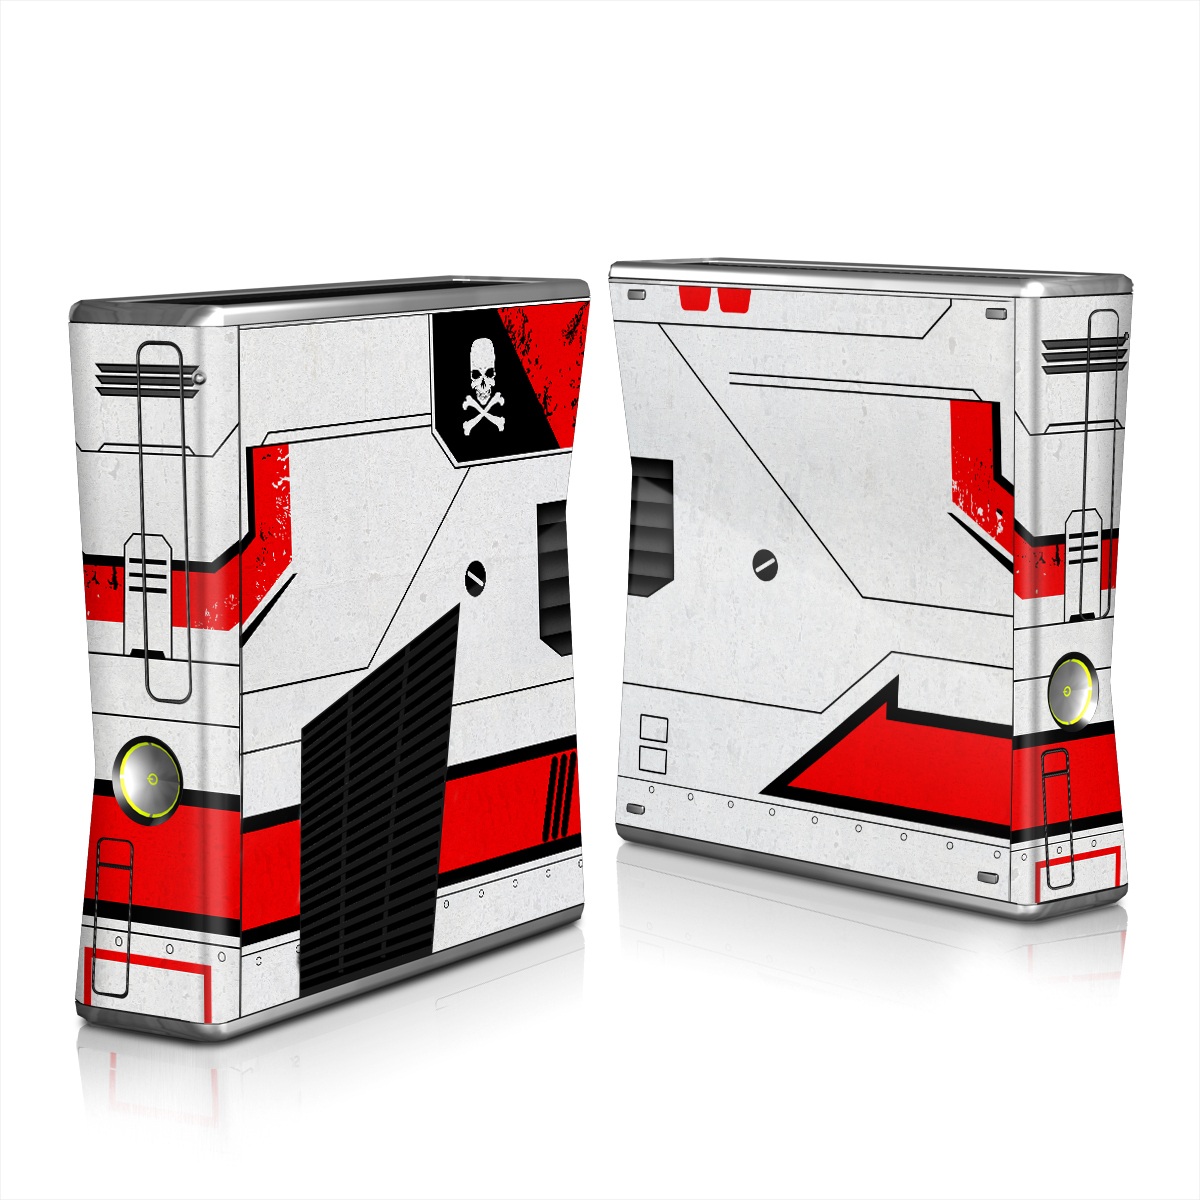 Xbox 360 S Skin design of Floppy disk, Technology, Electric red, Fictional character, with white, red, black, gray colors